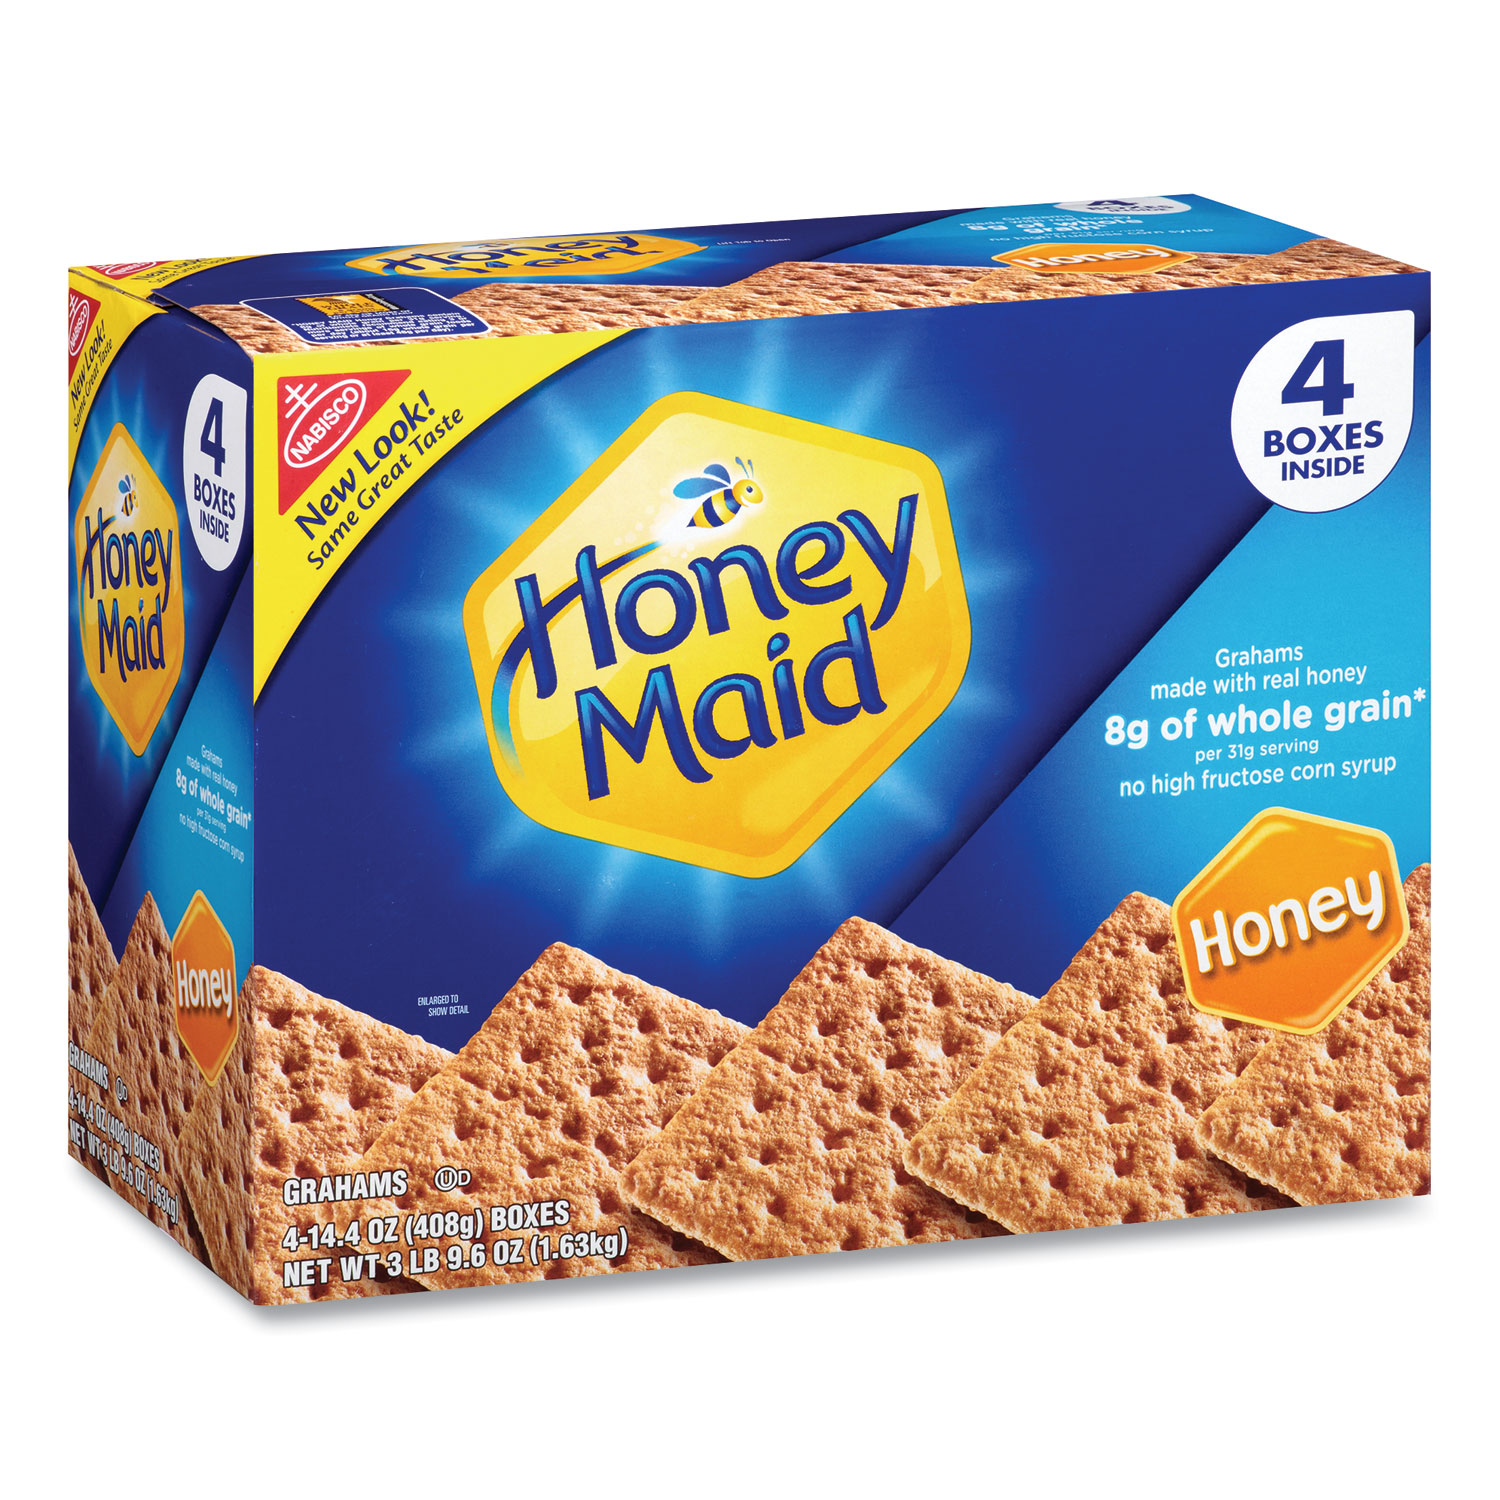  Nabisco 19256 Honey Maid Honey Grahams, 14.4 oz Box, 4 Boxes/Pack, Free Delivery in 1-4 Business Days (GRR22000442) 